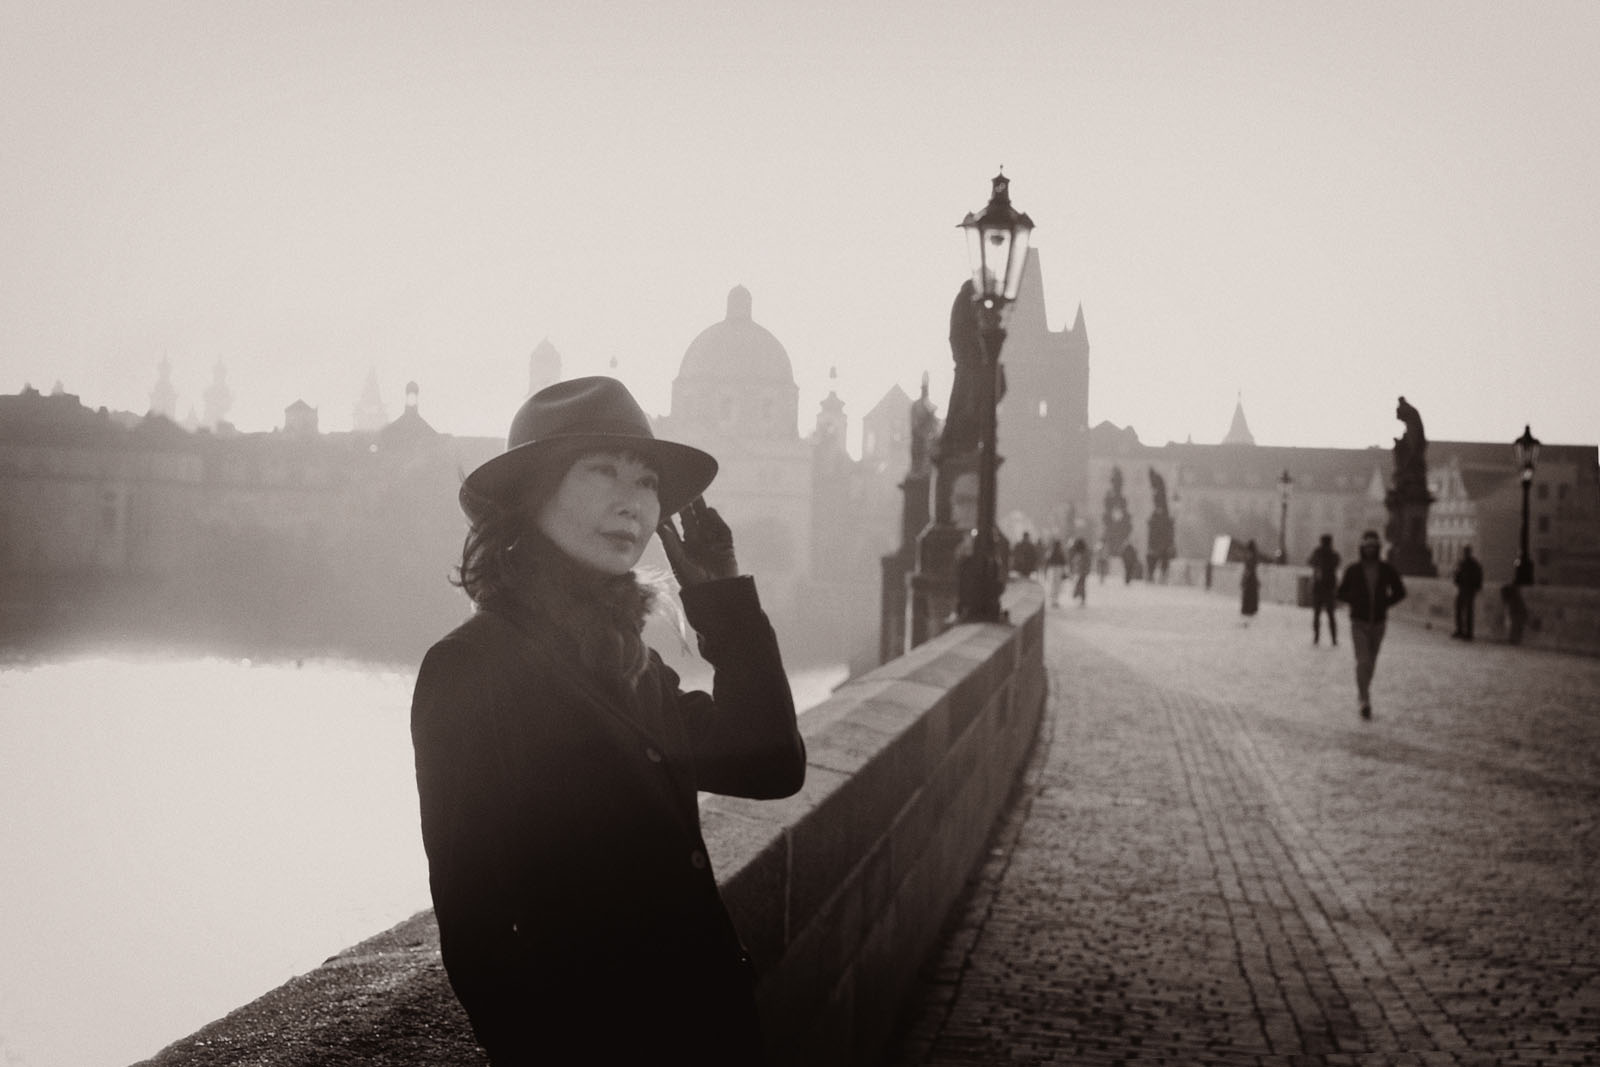 A dawn portrait on the Charles bridge, Prague as the sun rises in the backround. Travel photography by Kent Johnson.